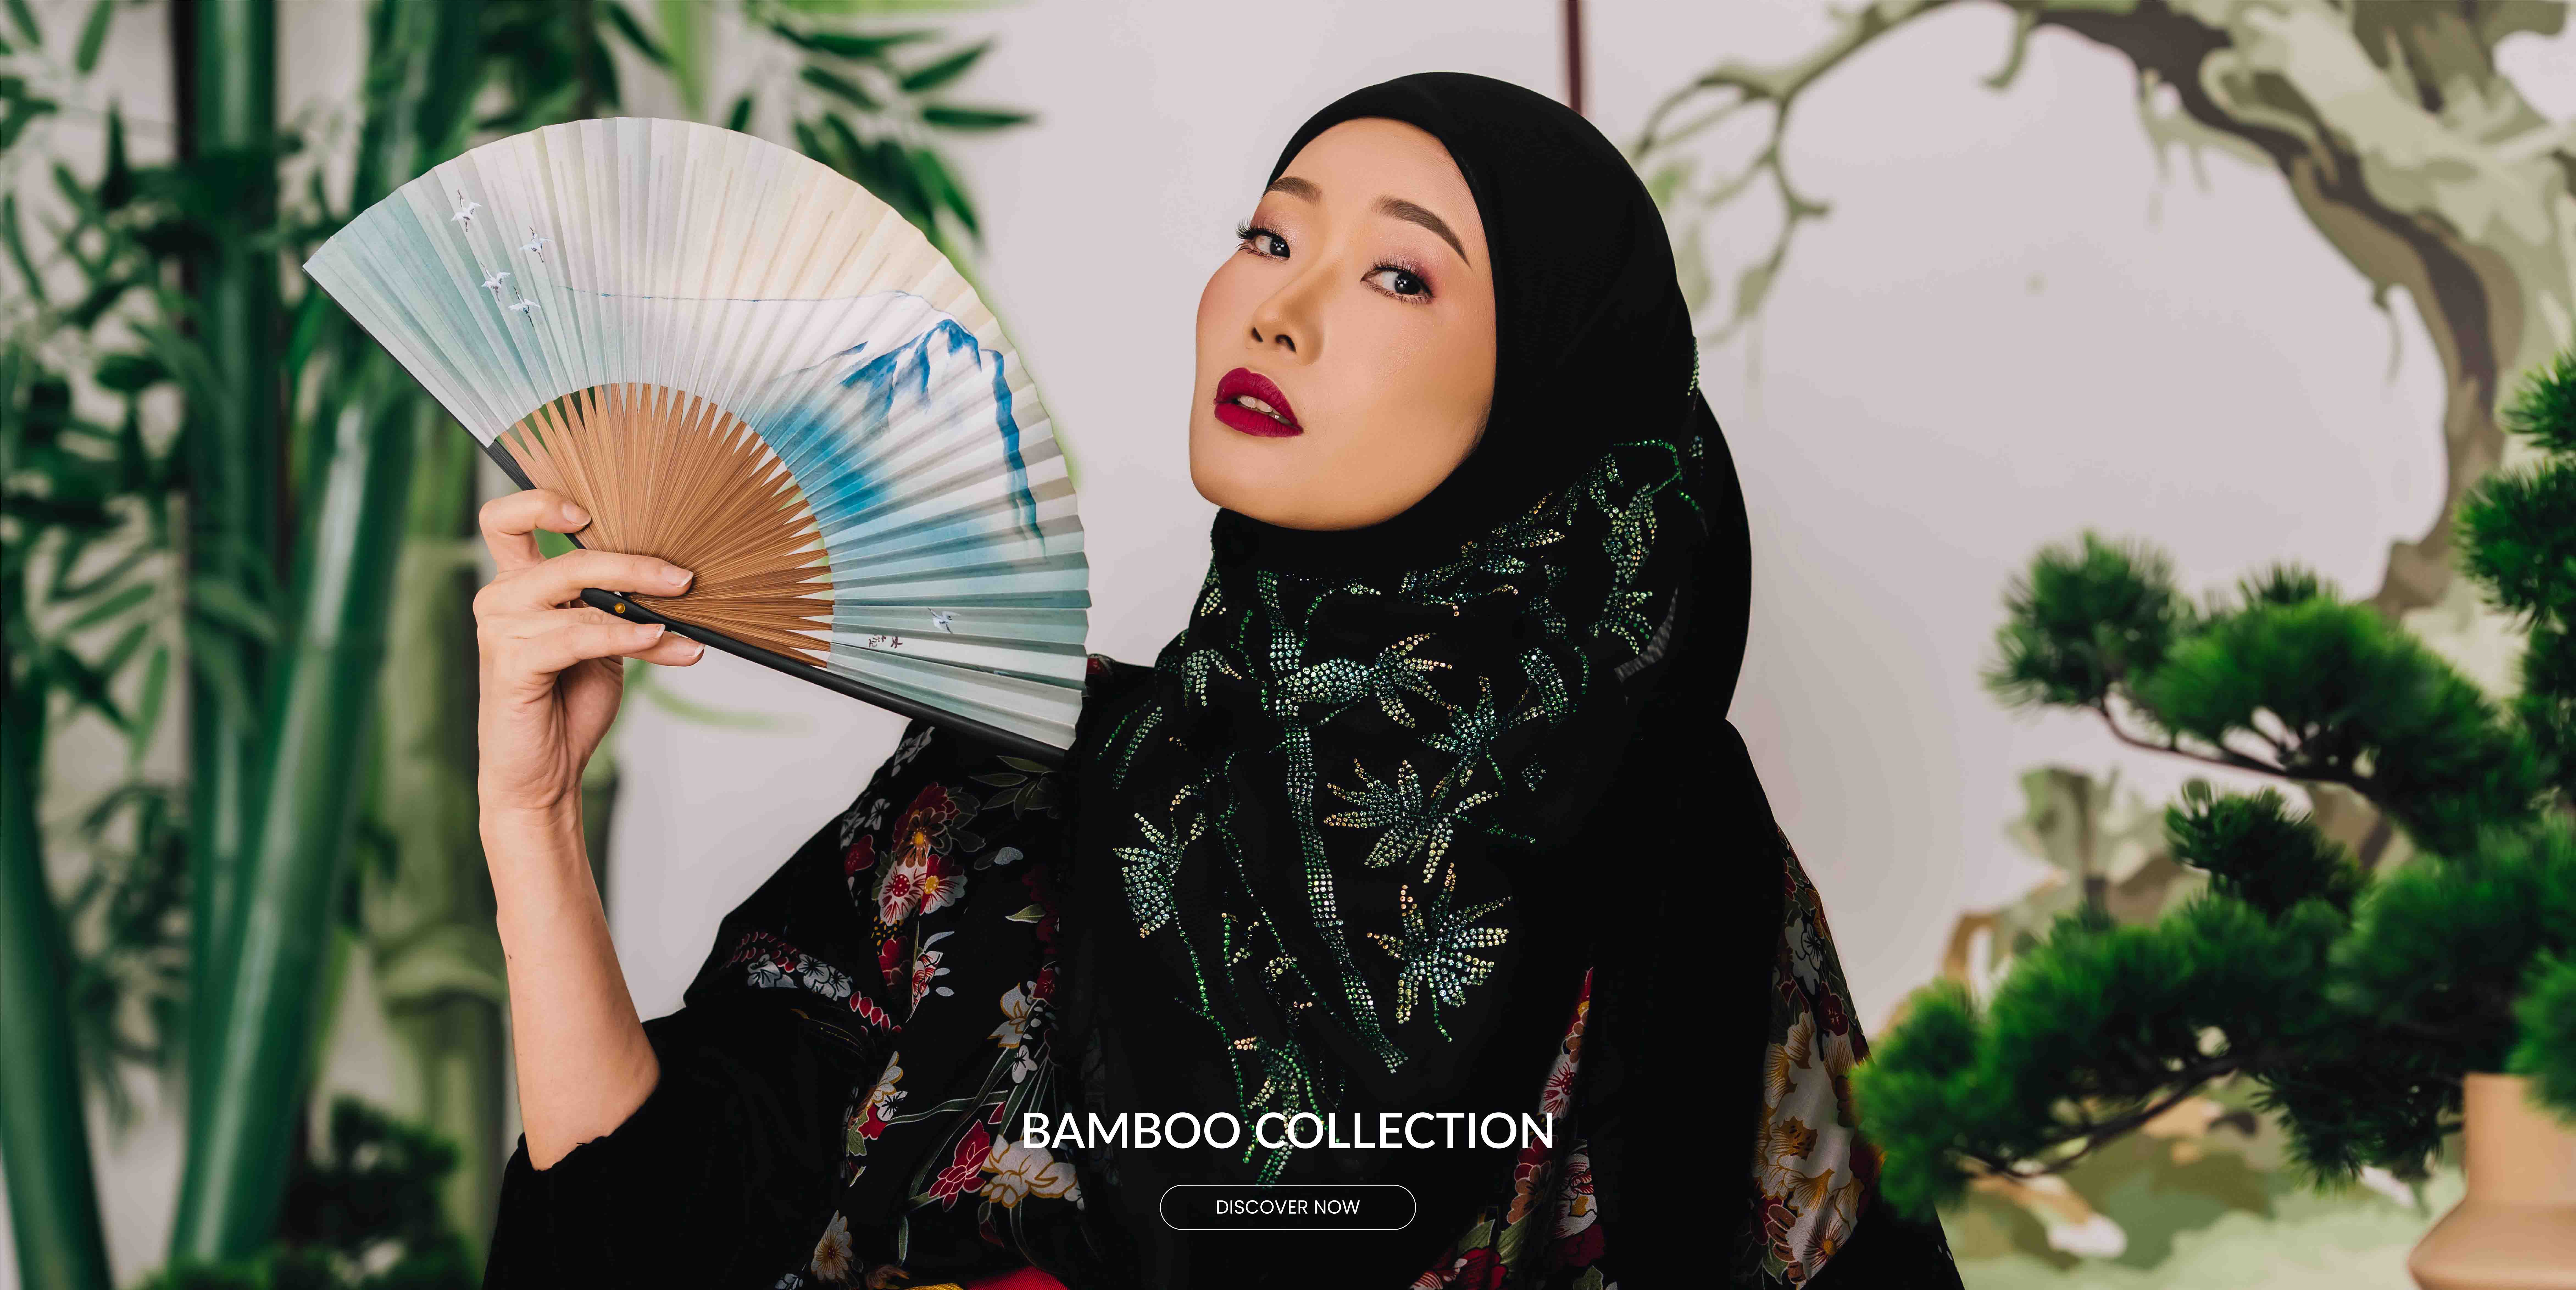 BAMBOO COLLECTION